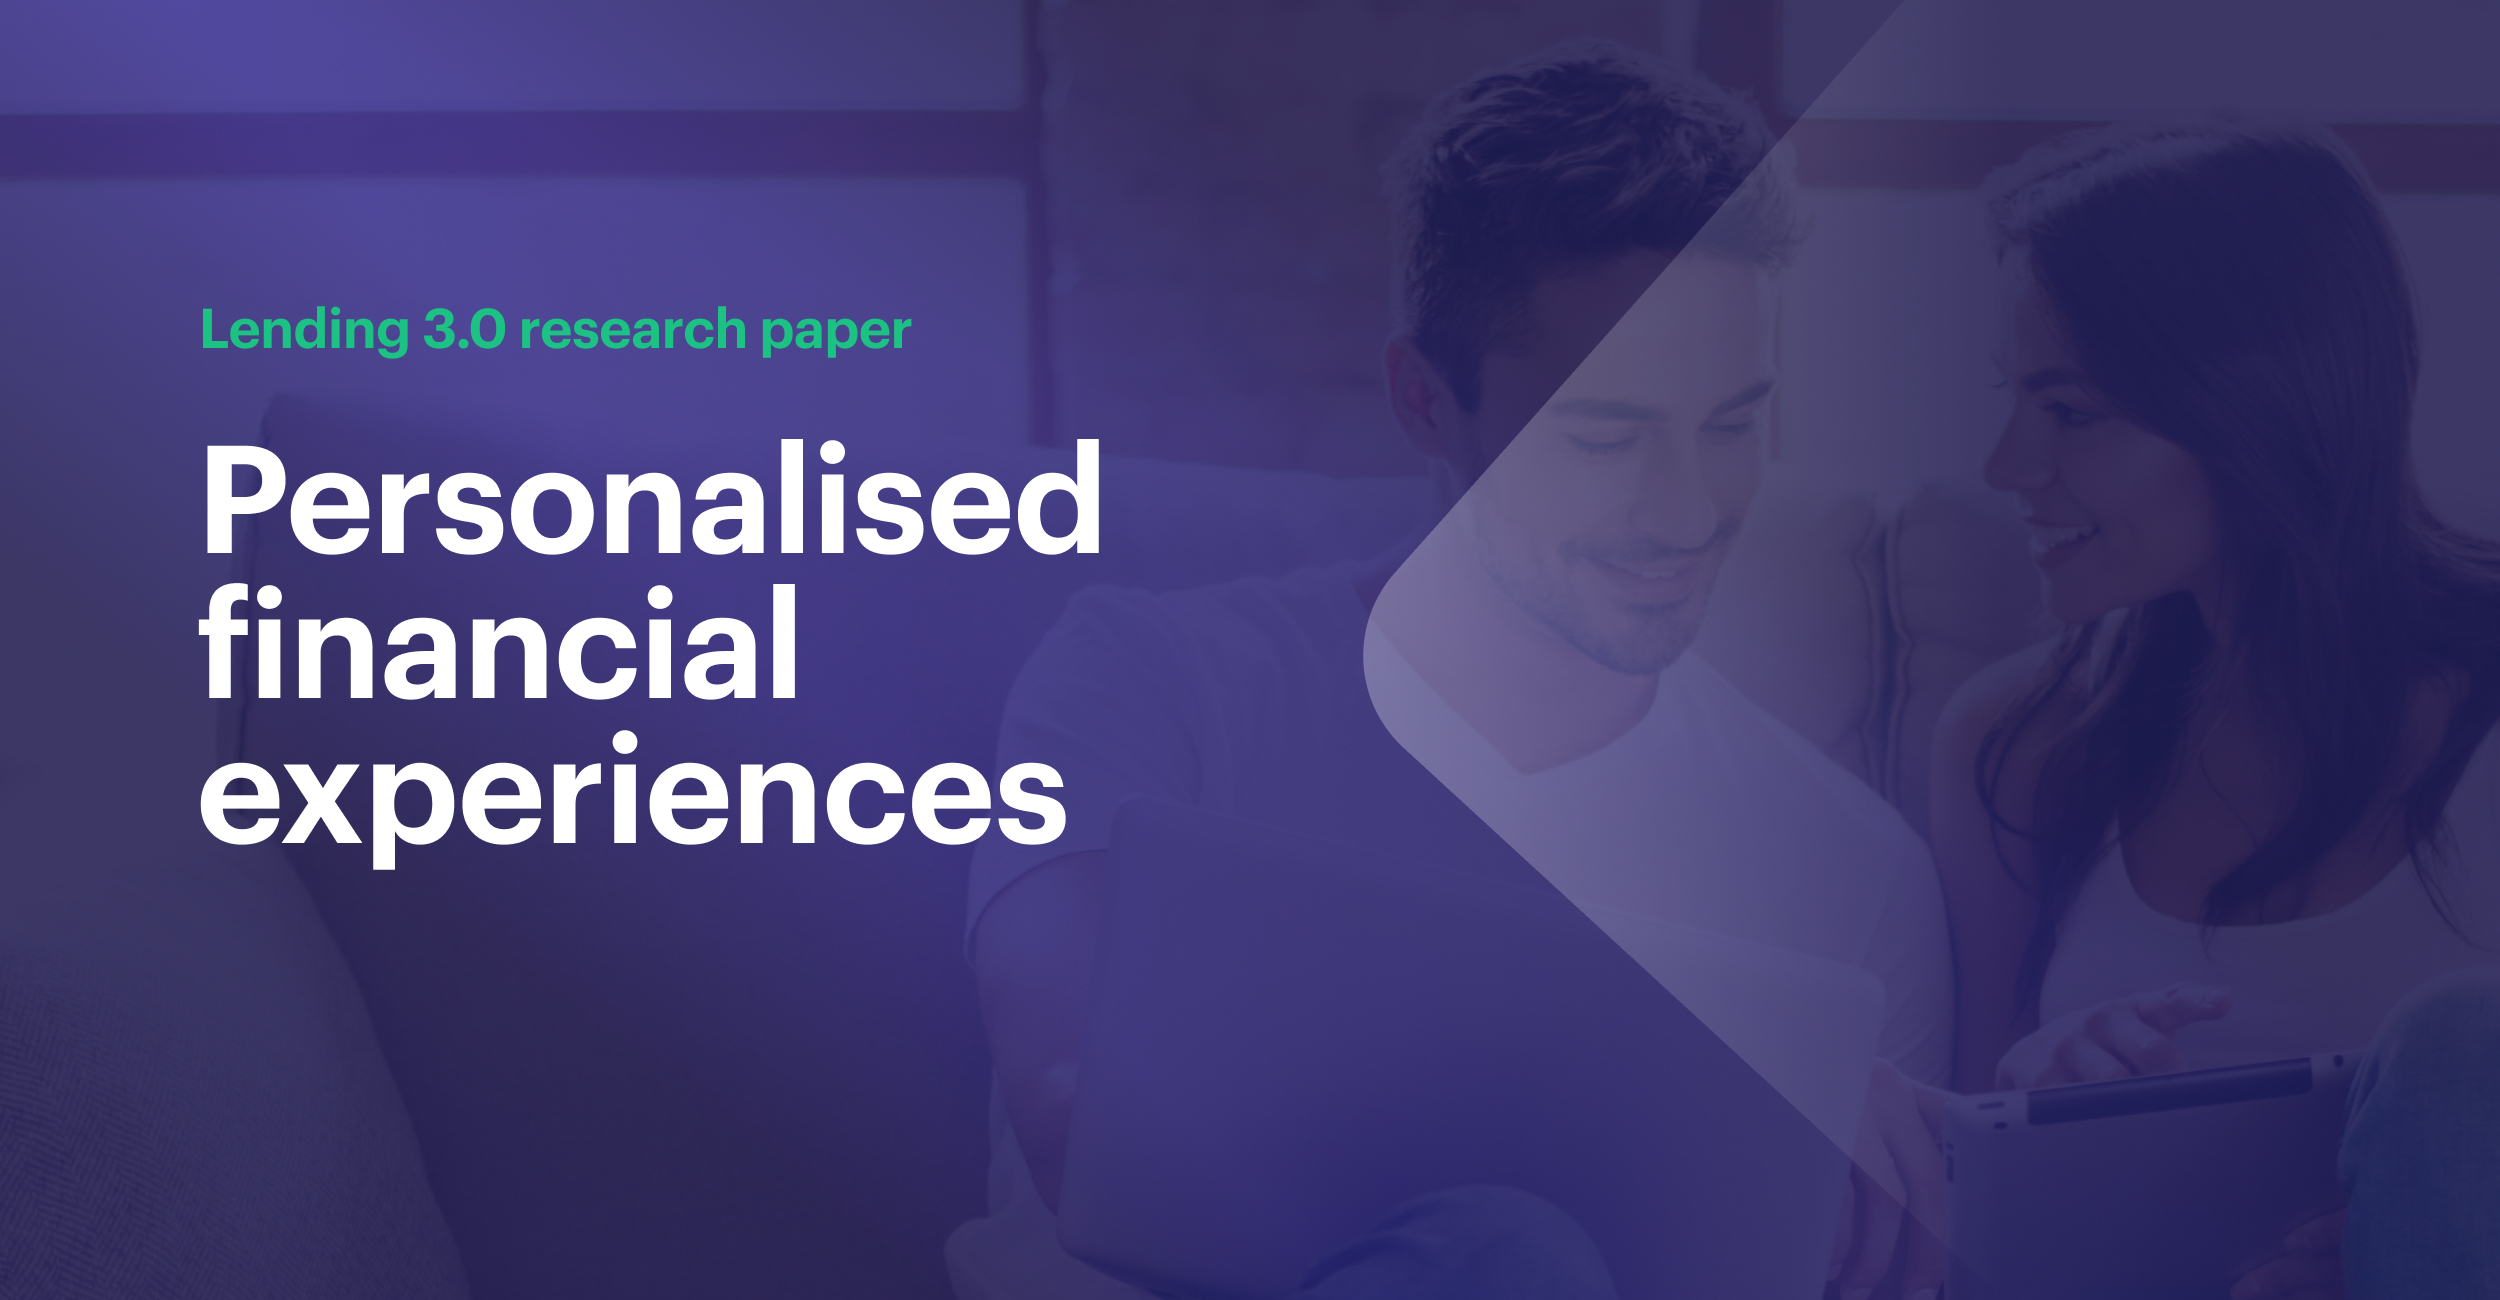 Lending-3.0-research-paper-Personalised-financial-experiences